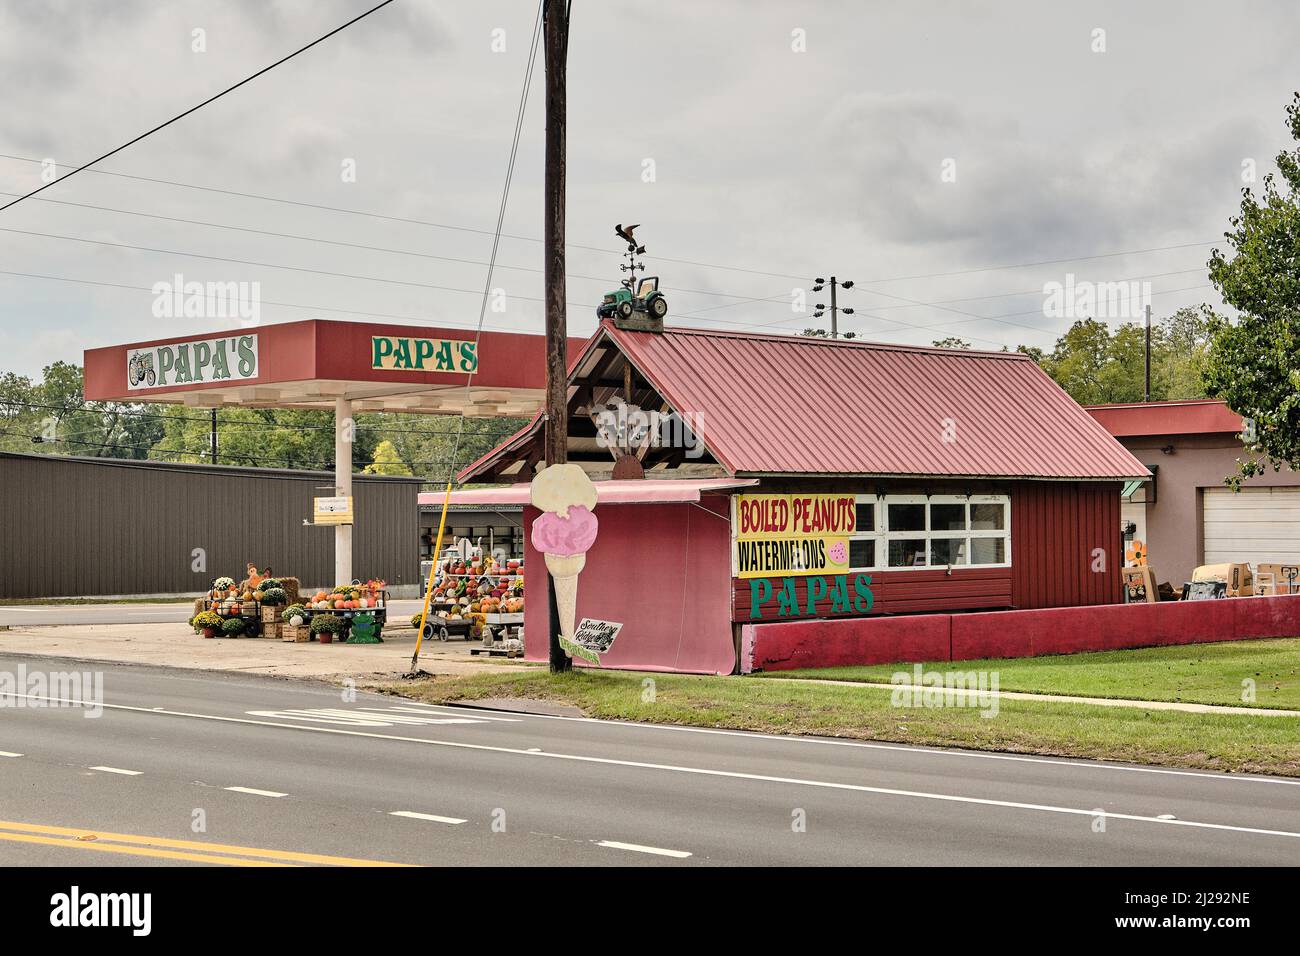 Pappa's roadside farm store or fruit stand or small country store in Brantley Alabama, rural USA. Stock Photo